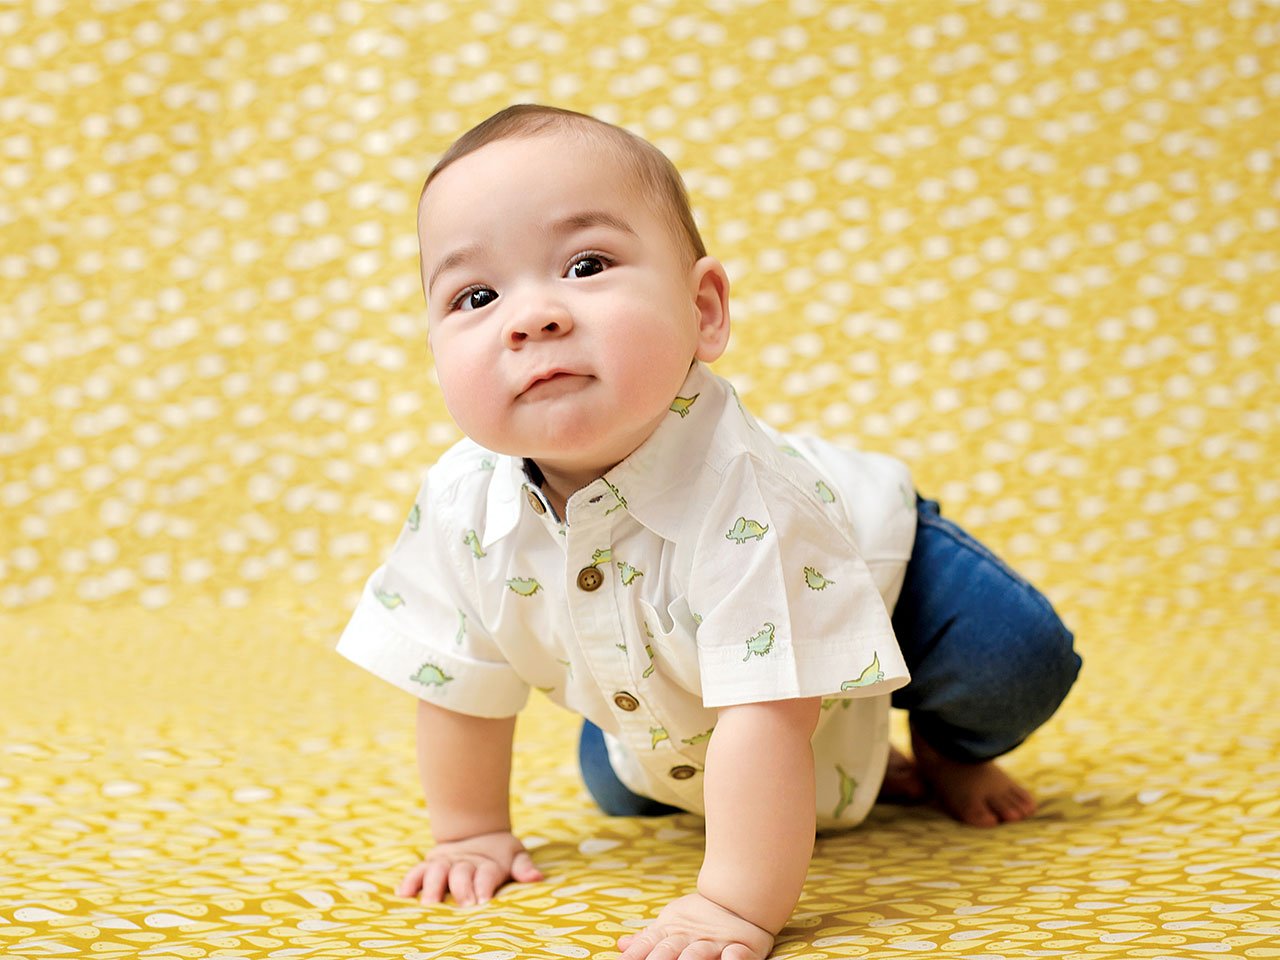 7 mistakes parents make when taking baby pictures